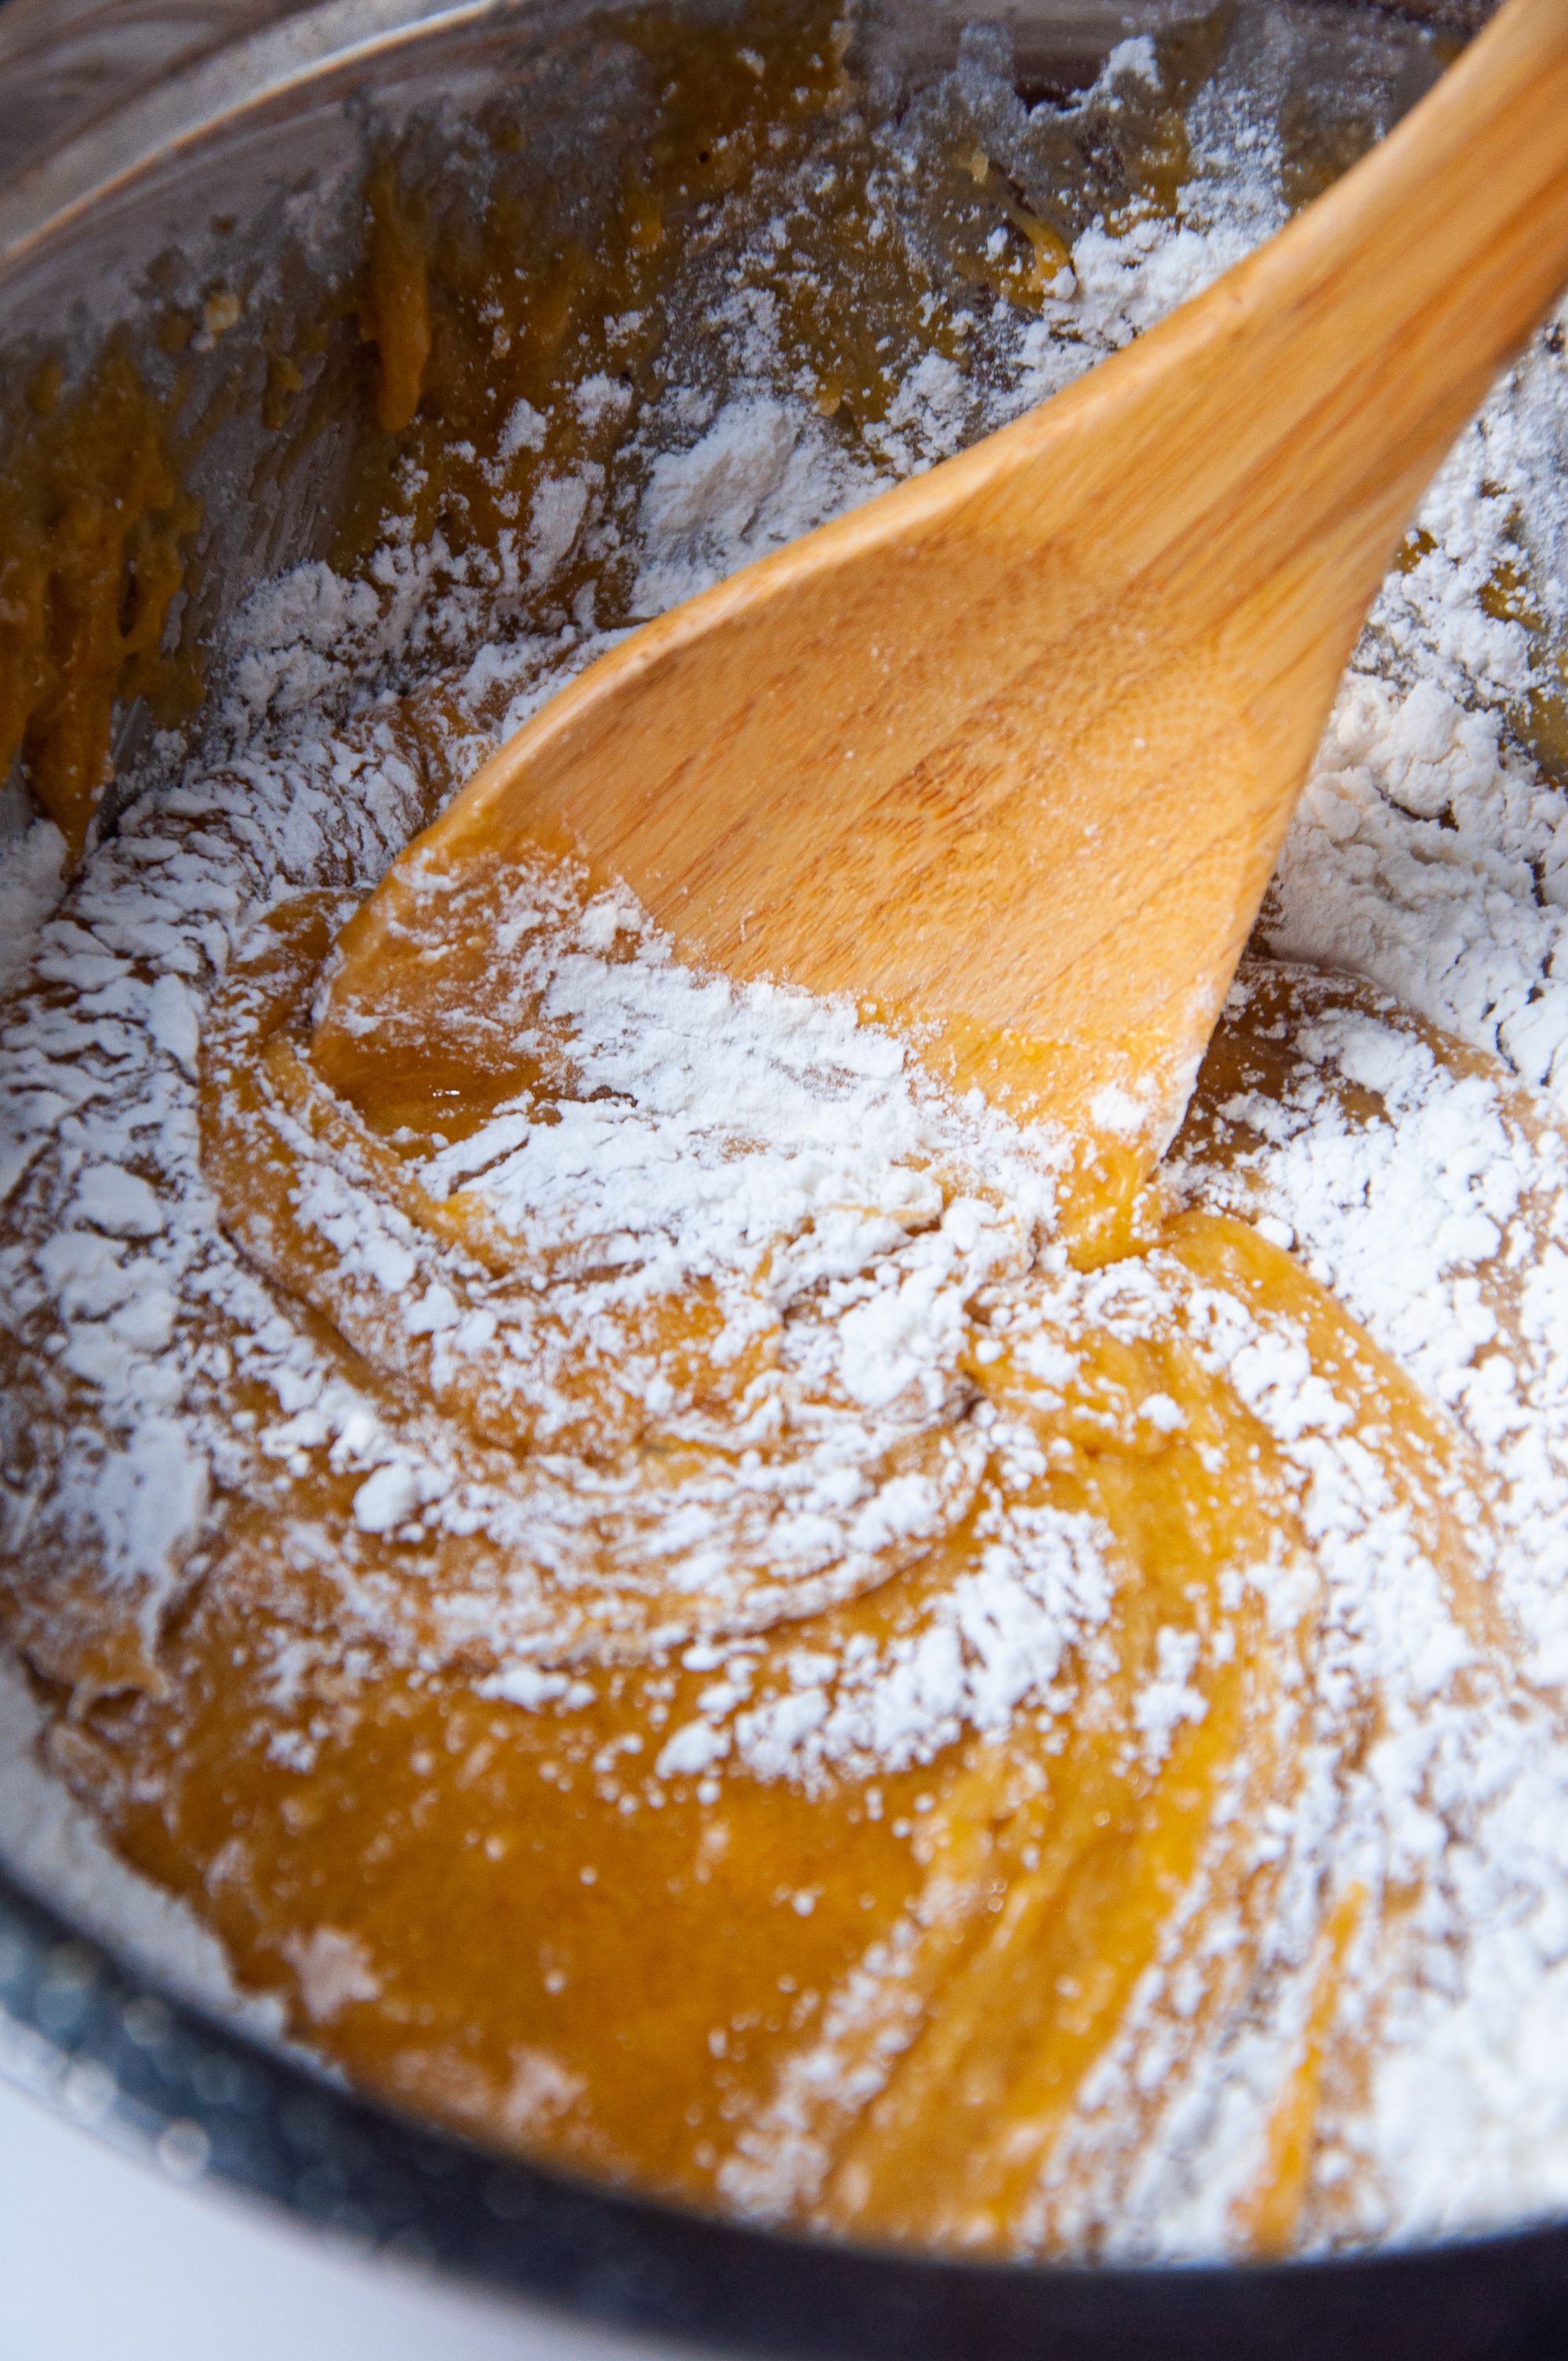 Adding the flour mixture and mixing slowly with a wooden spoon